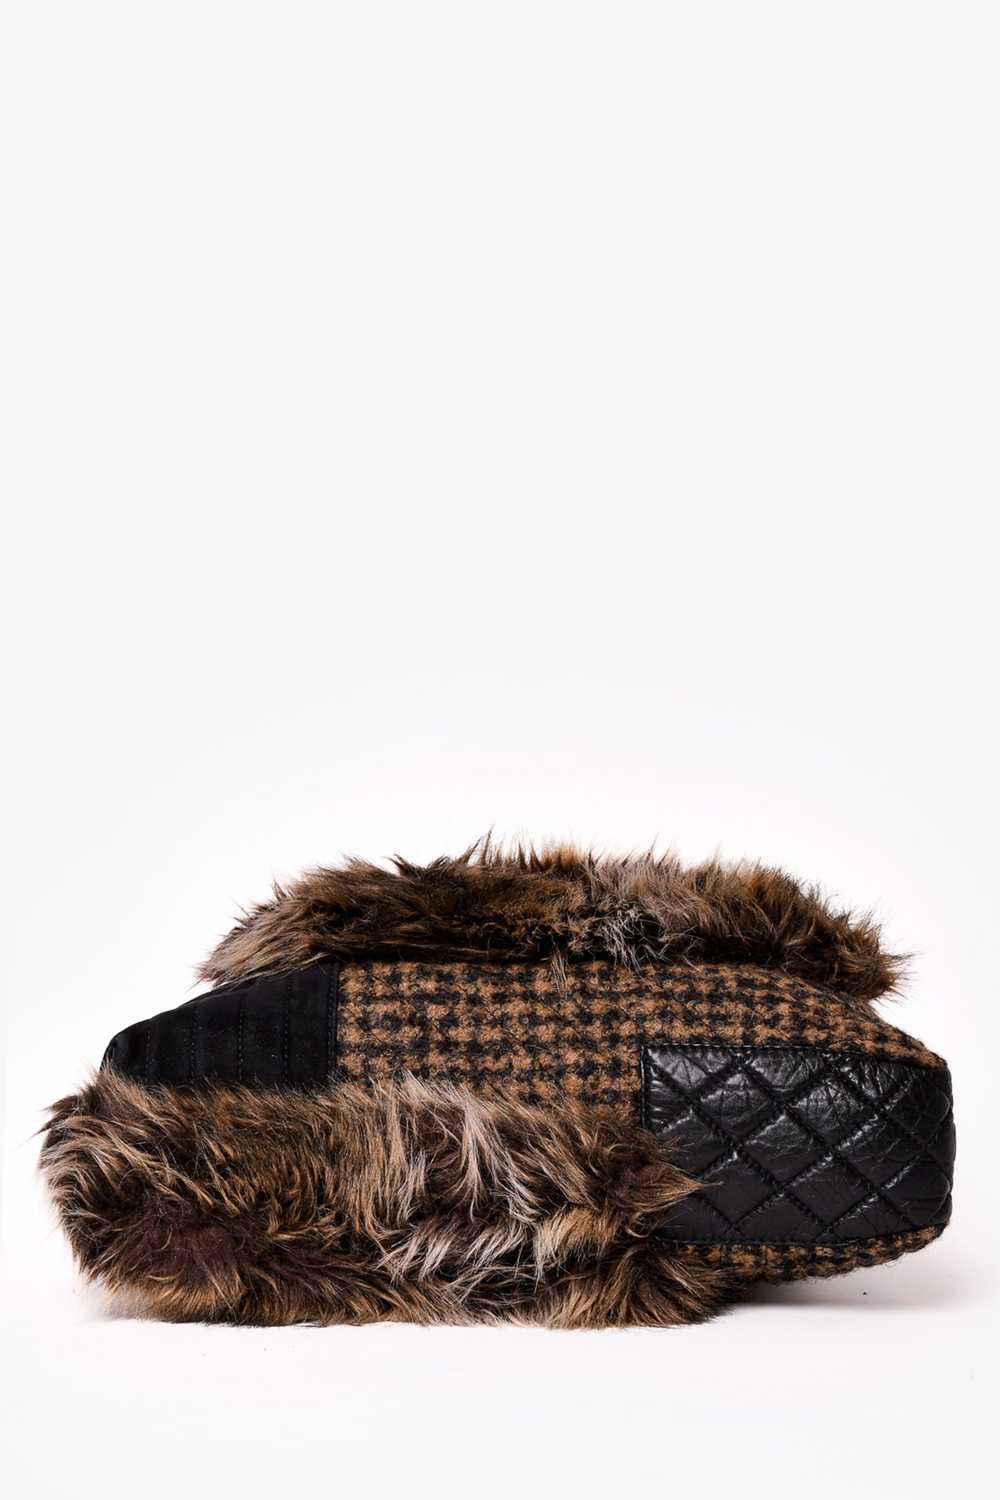 Pre-loved Chanel™ 2009-2010 Leather/Faux Fur Fant… - image 10